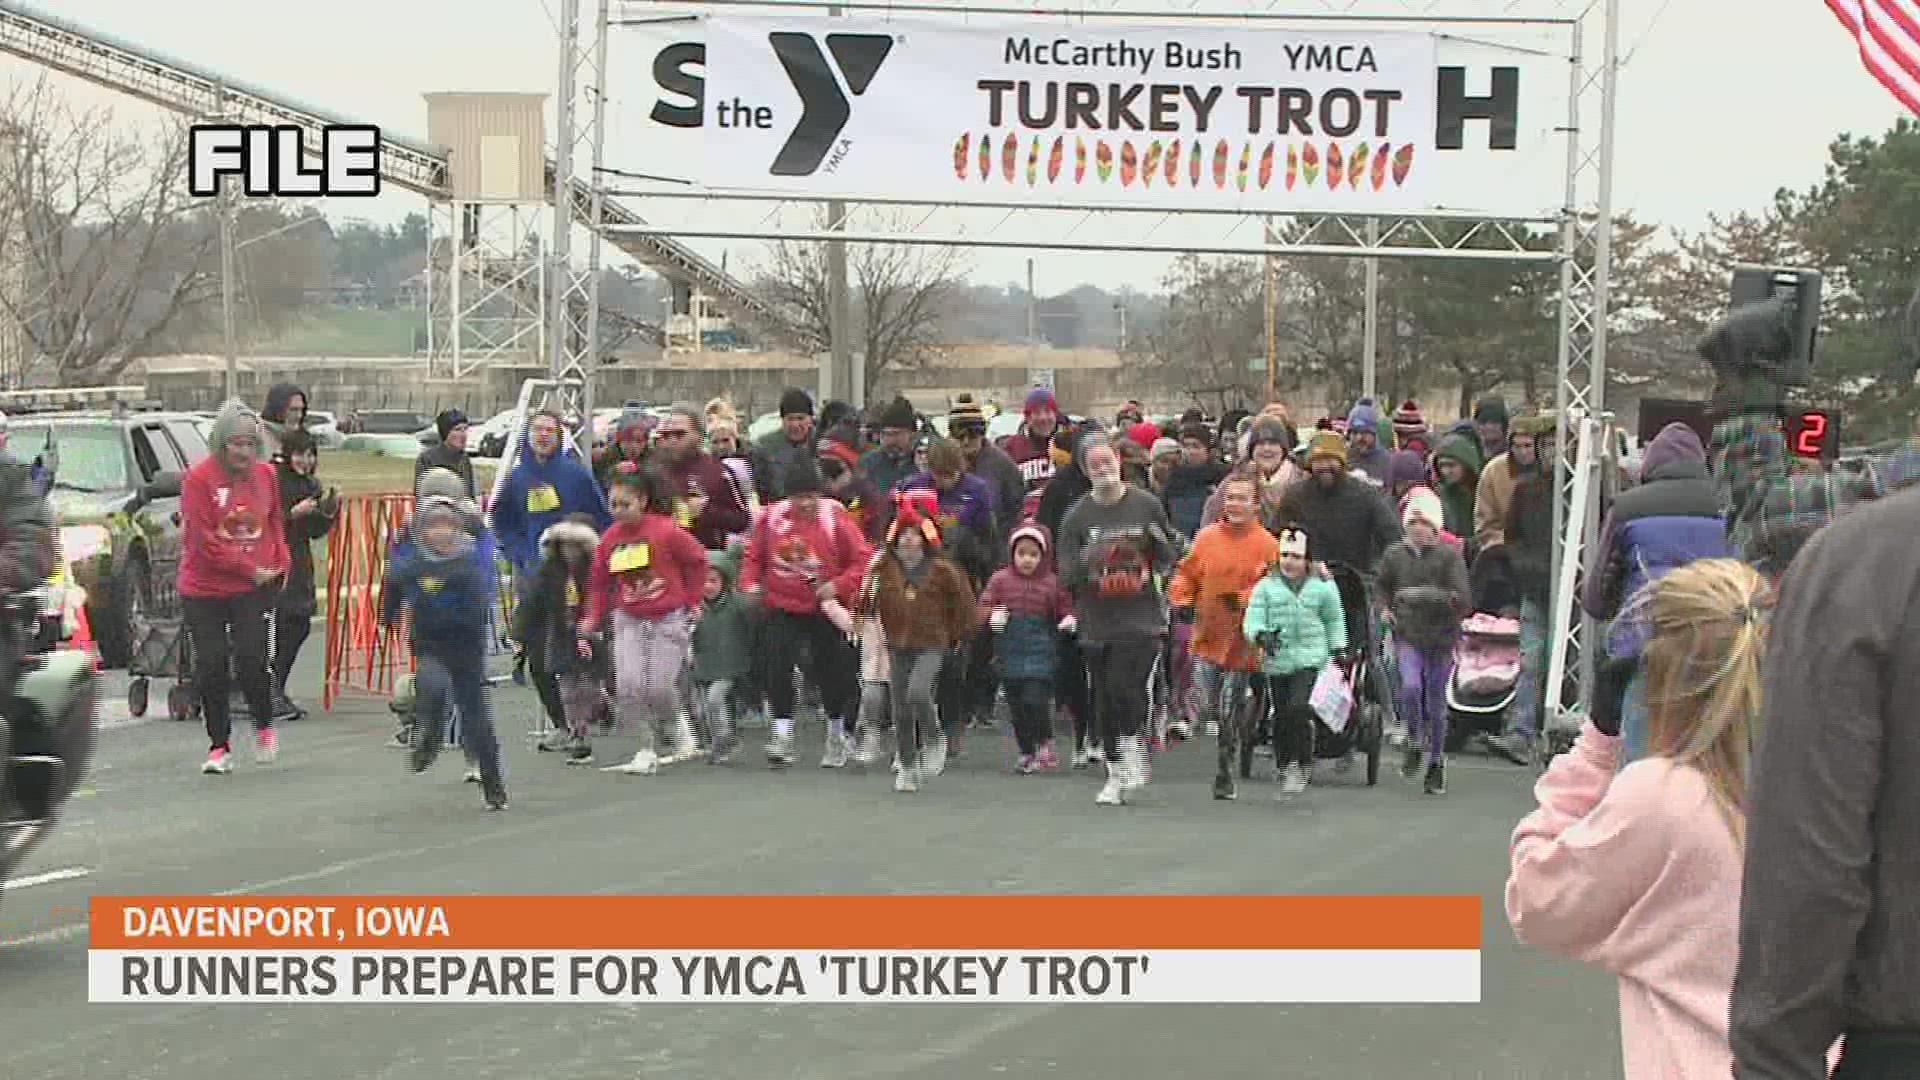 Some Quad Cities family traditions include a pre-Thanksgiving dinner workout run that also benefits the YMCA of the Iowa Mississippi Valley.